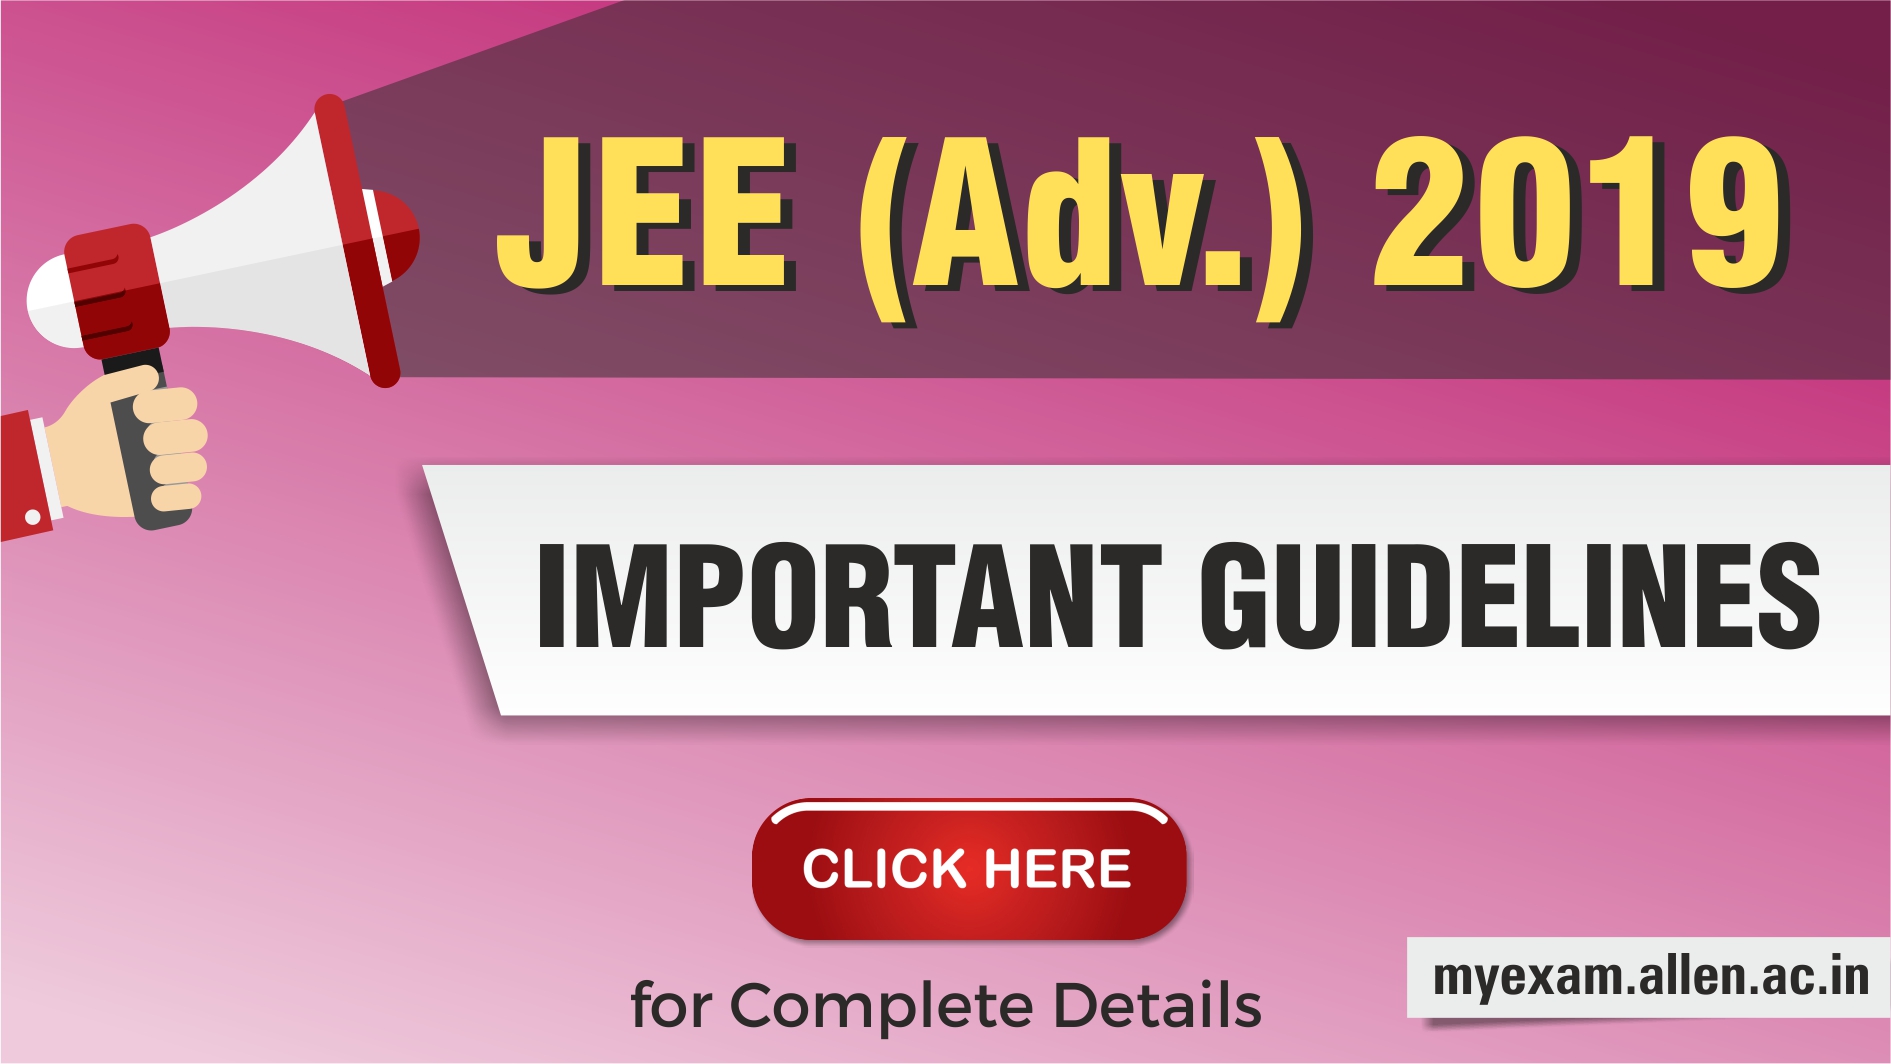 JEE Adv Important Guidelines 2019